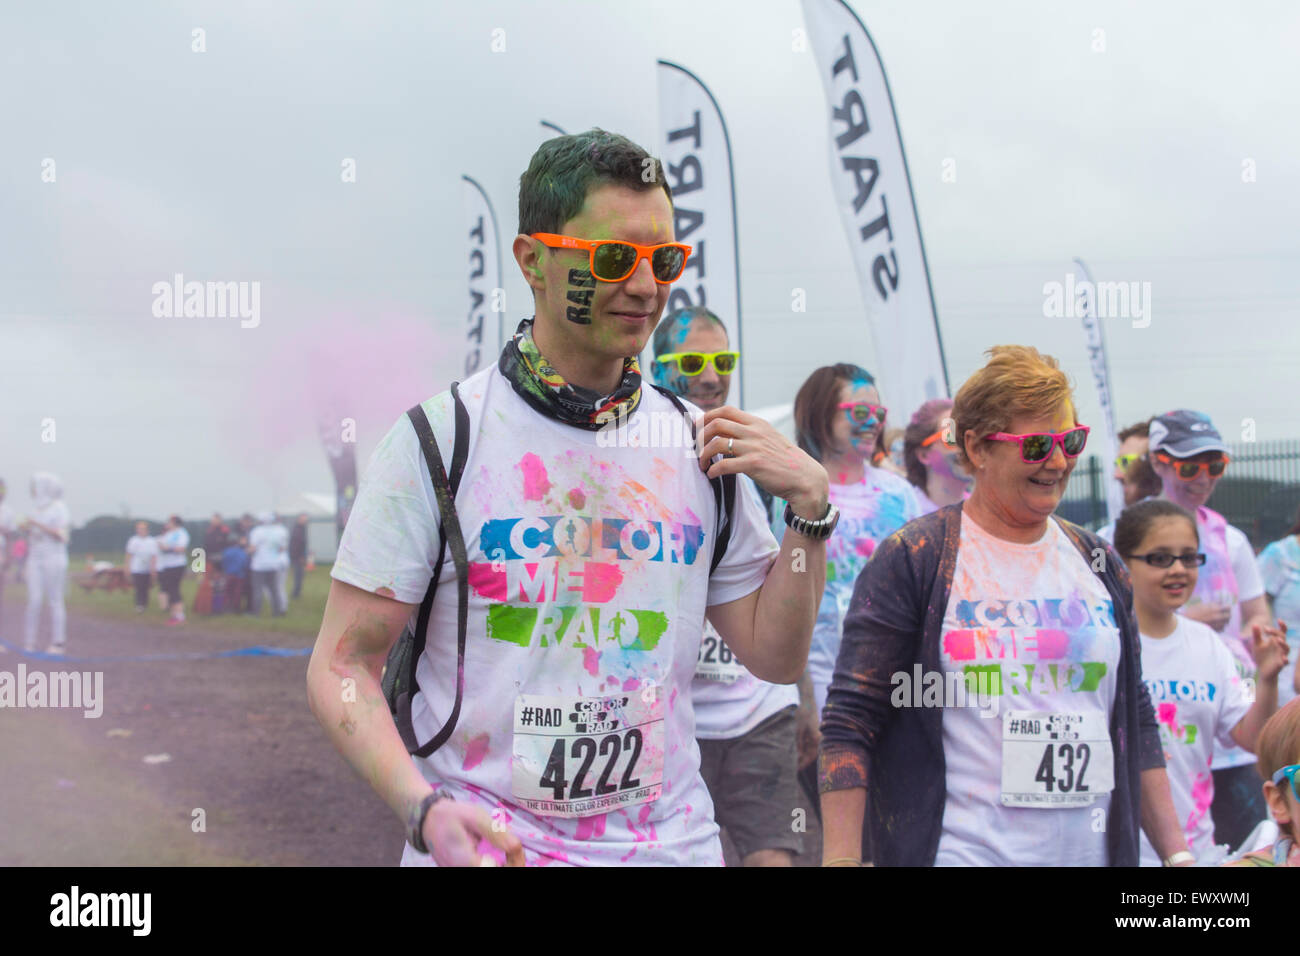 Redbourn, Hertfordshire, UK. 13th June, 2015.People gathered at the Hertfordshire County Show for the Color Me Rad 5K run. Stock Photo